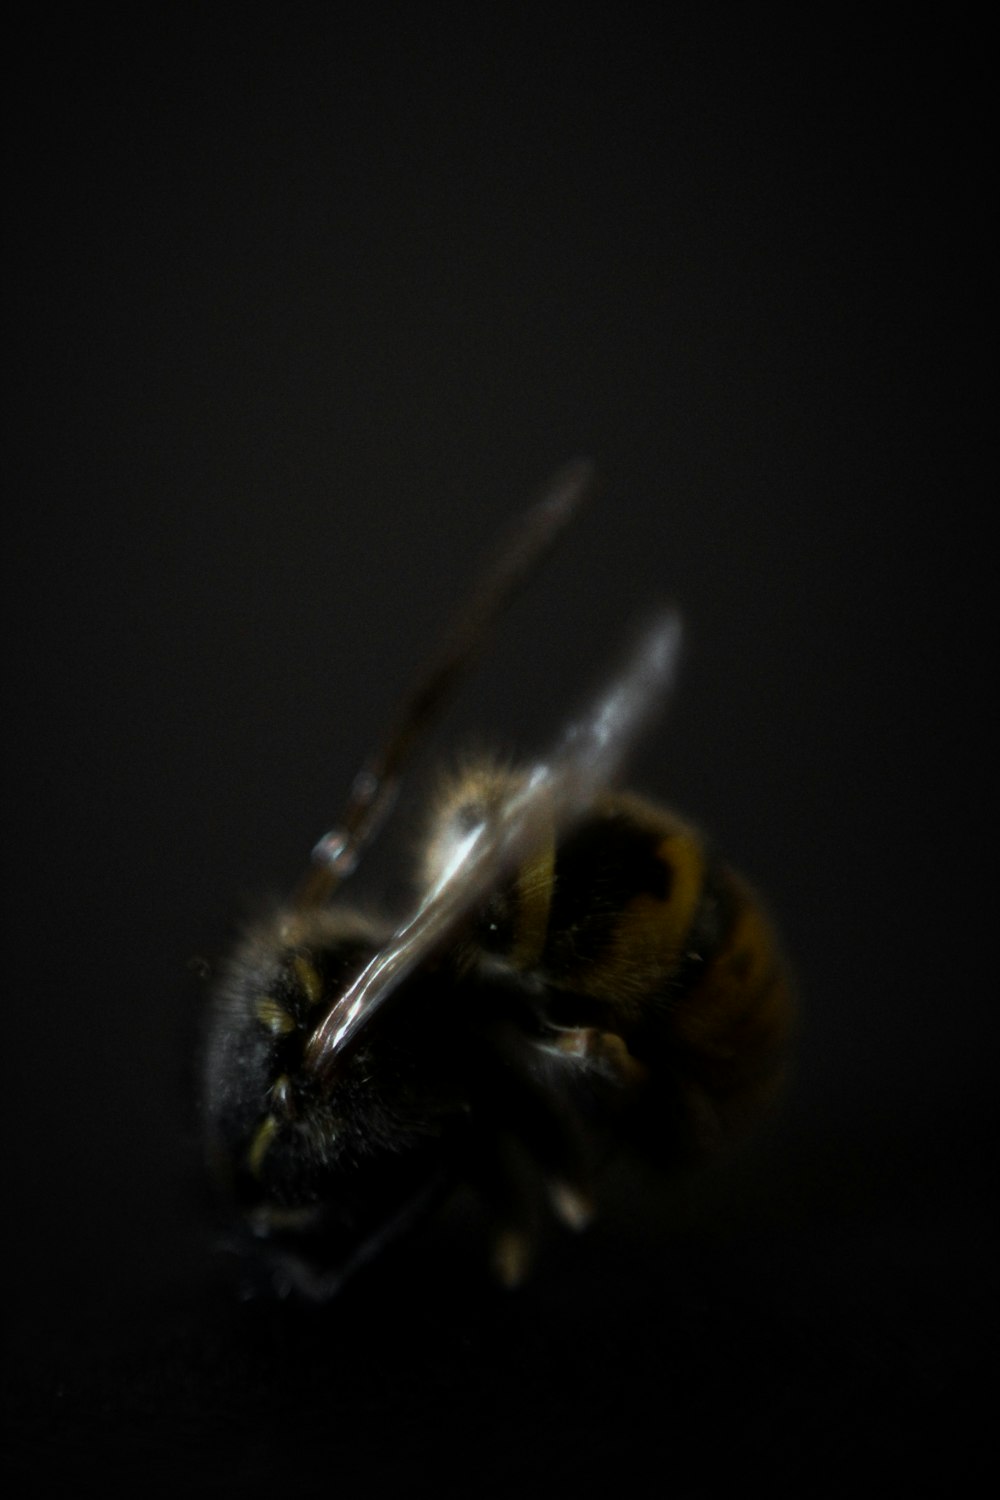 a close up of a bee on a black background